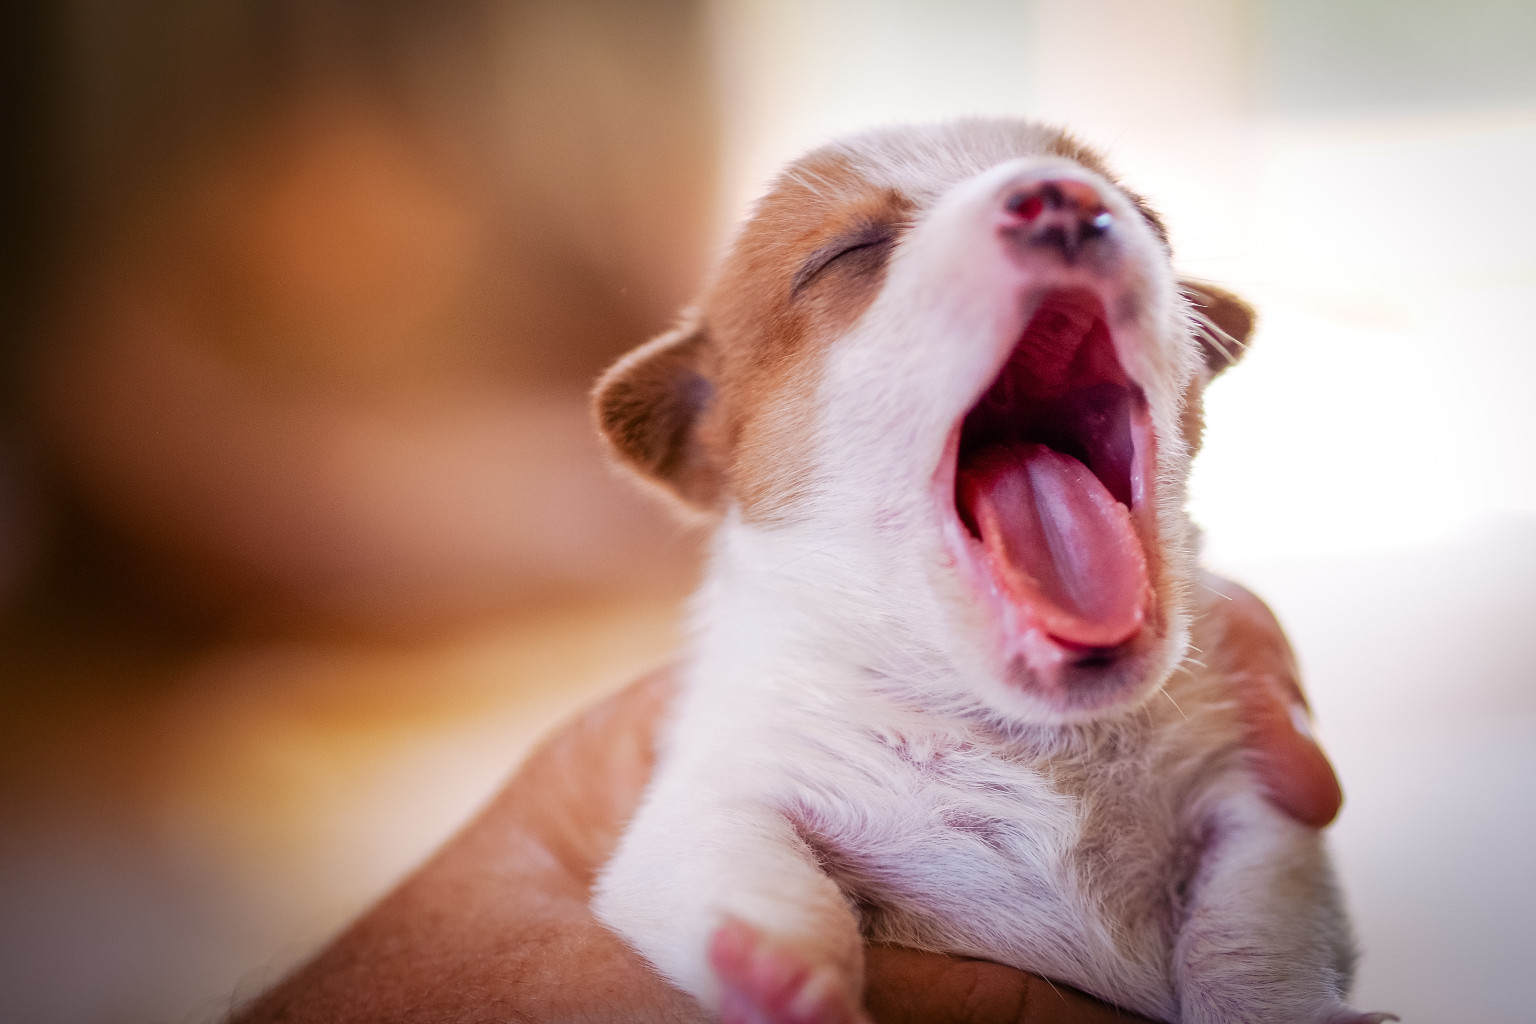 Dogs Can 'Catch' Our Yawns: New Study Reveals